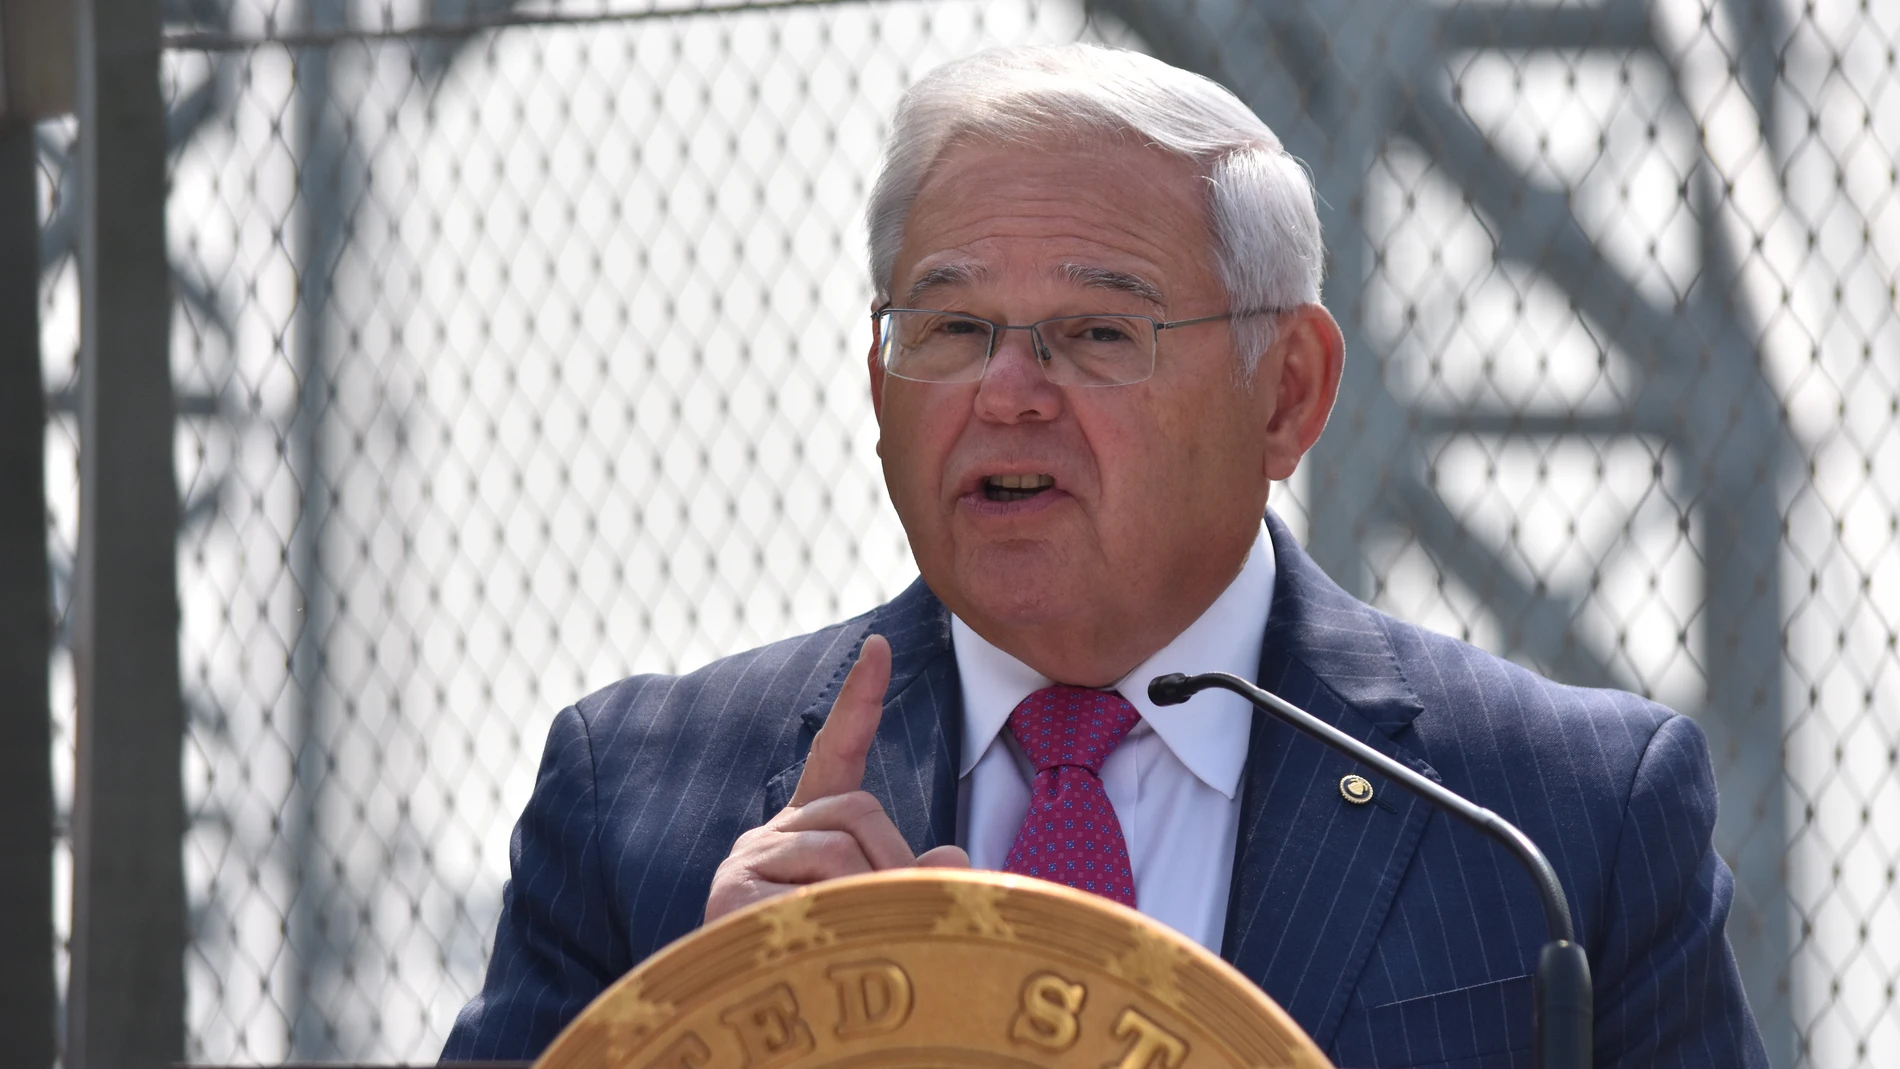 May 15, 2023, Fort Lee, New Jersey, United States: U.S. Senator Bob Menendez talks about his legislation proposal in the U.S. Senate on the congestion tax. US. Senator Bob Menendez (D-N.J.) joined with local officials, advocates and business and transportation leaders, to announce legislation he is introducing in the U.S. Senate regarding New York's congestion pricing tax on New Jersey drivers and small businesses. The event took place at the George Washington Bridge in Fort Lee, New Jersey, ...